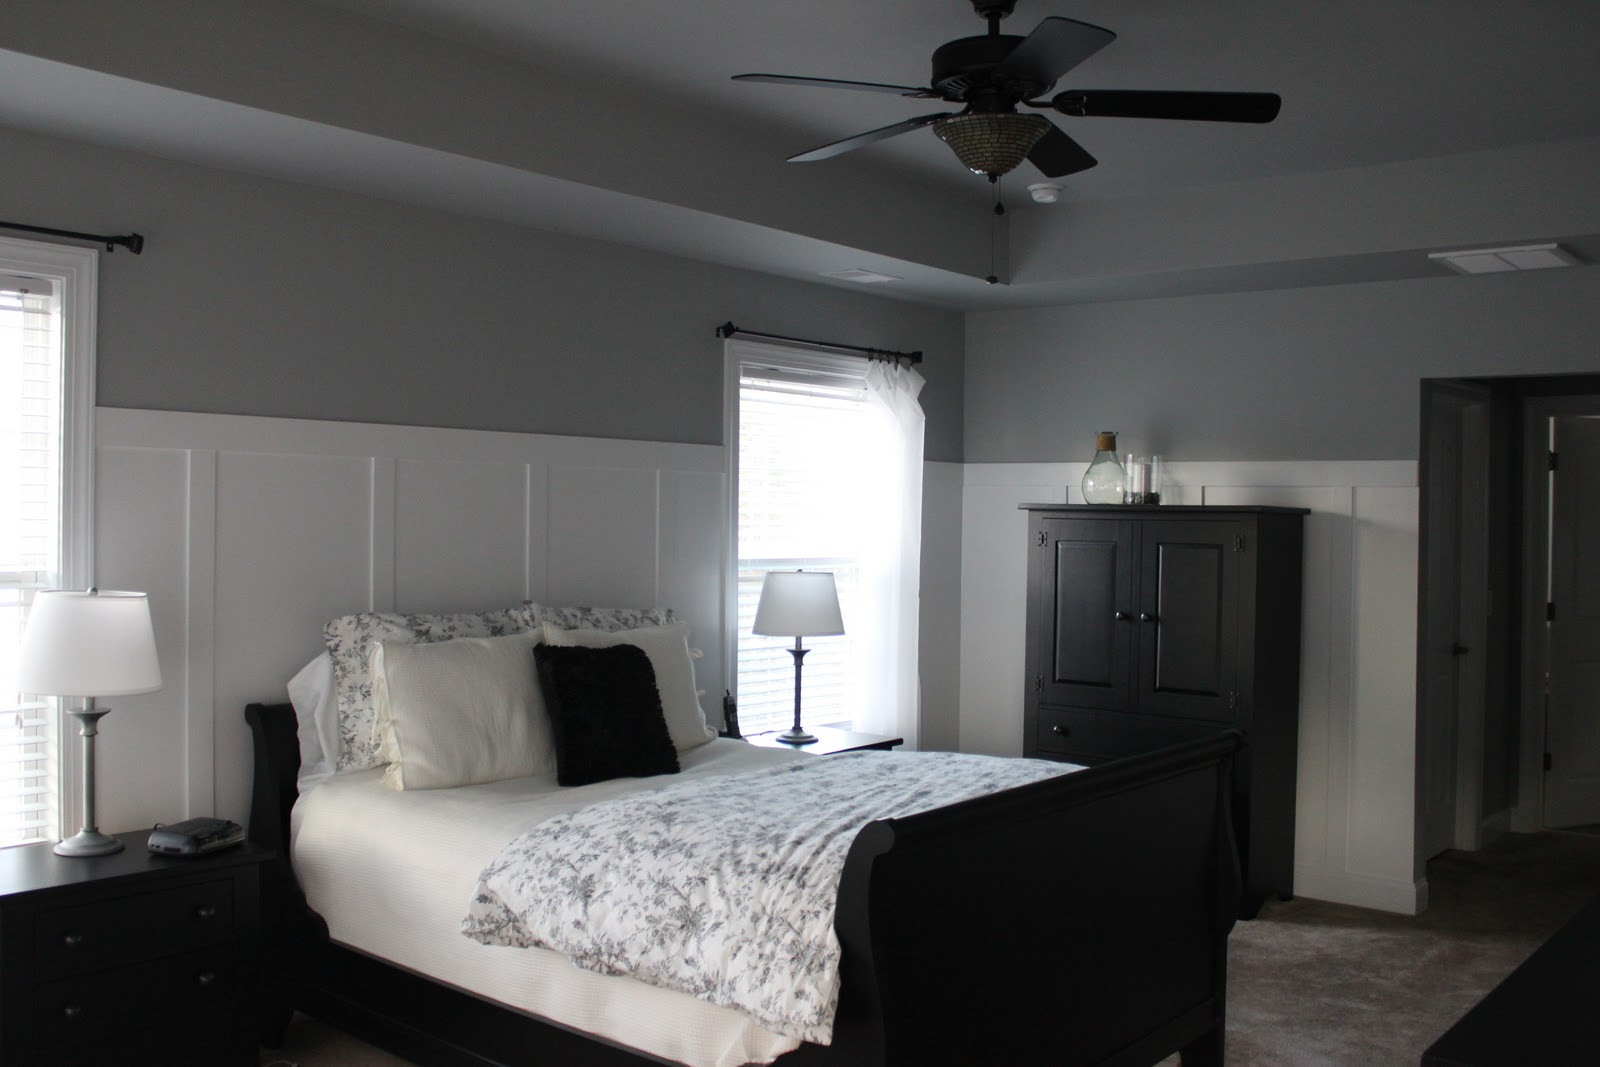 Bedroom Gray Walls
 Cents able Spaces Master Bedroom